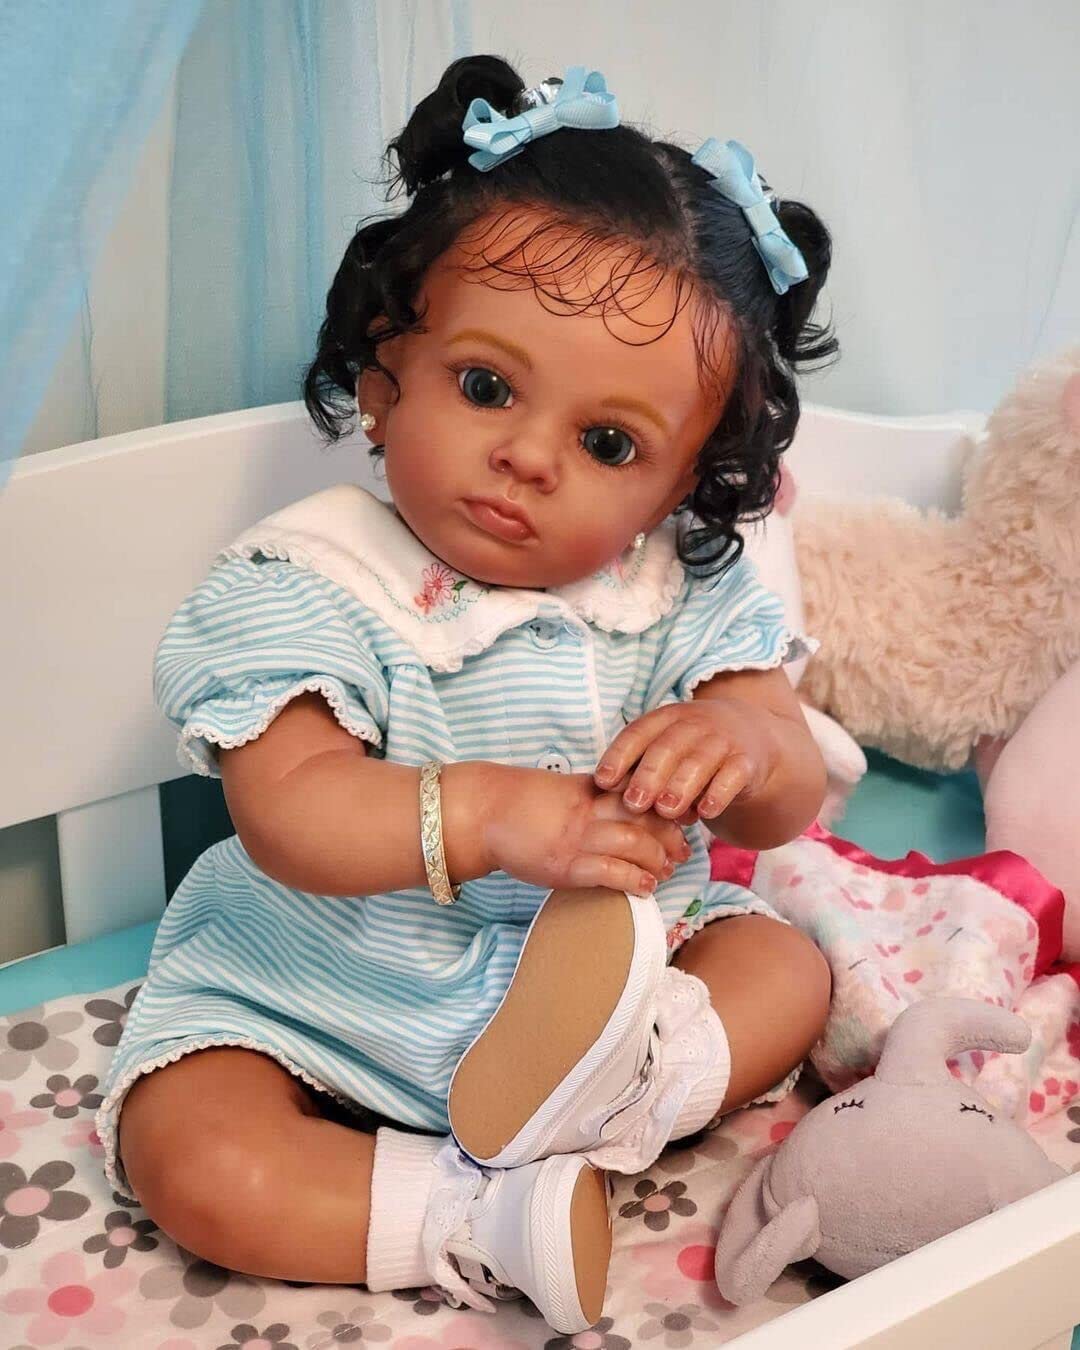 Angelbaby Lifelike Reborn Baby Dolls Black Girl 24 inch African American Reborn Toddler Dolls Look Real Cute Soft Realistic Newborn Silicone Dolls for Girls Gift Toys